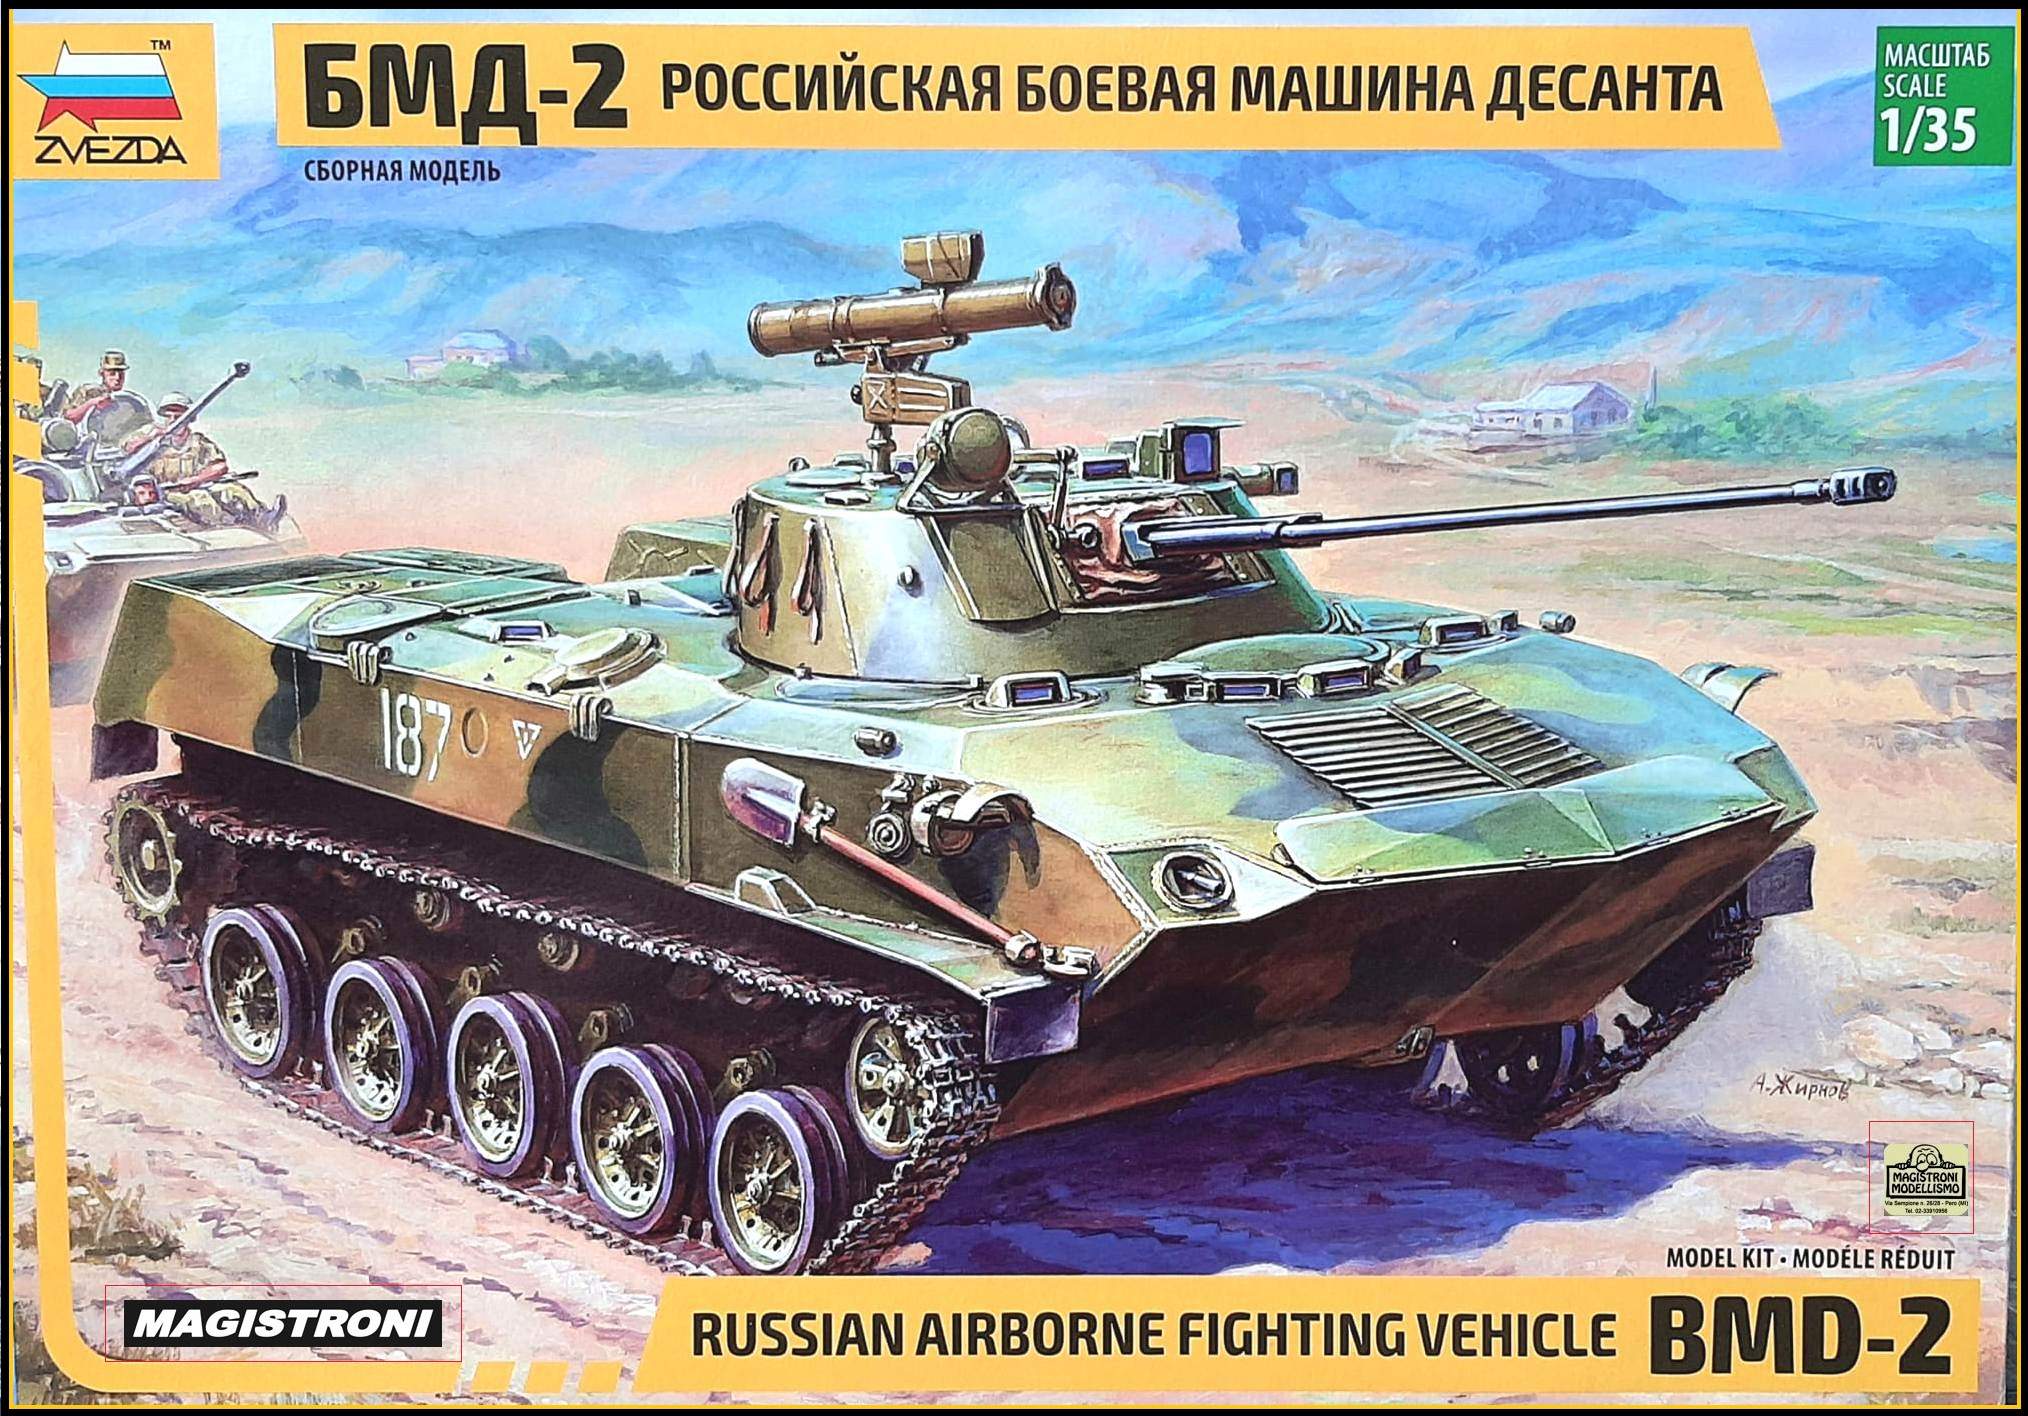 RUSSIAN AIRBORNE FIGHTING VEHICLE BMD-2